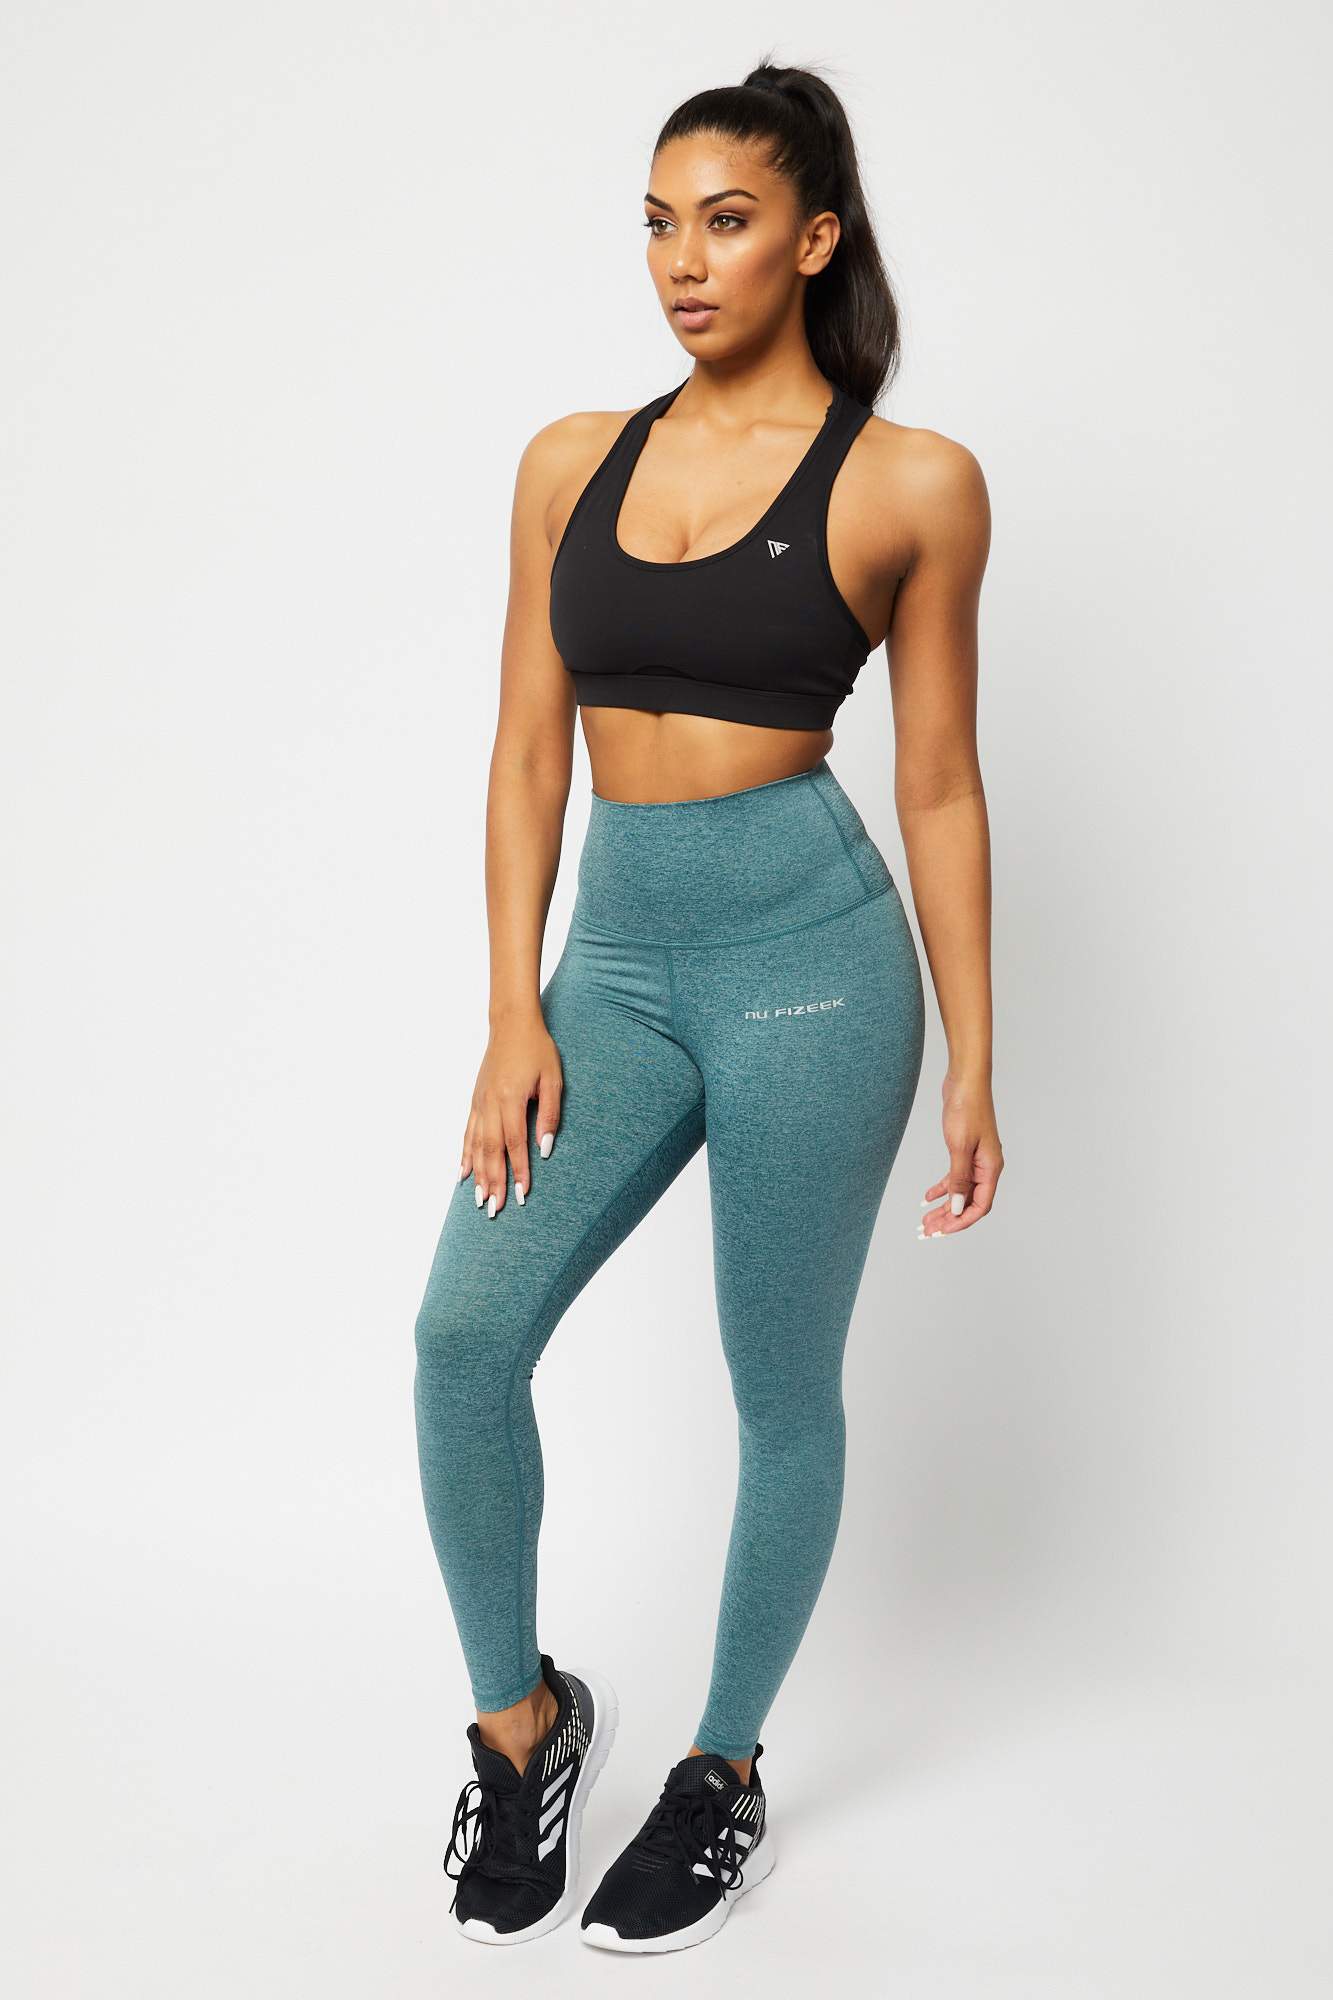 What Is Gymshark? The Workout Leggings Ruling Instagram